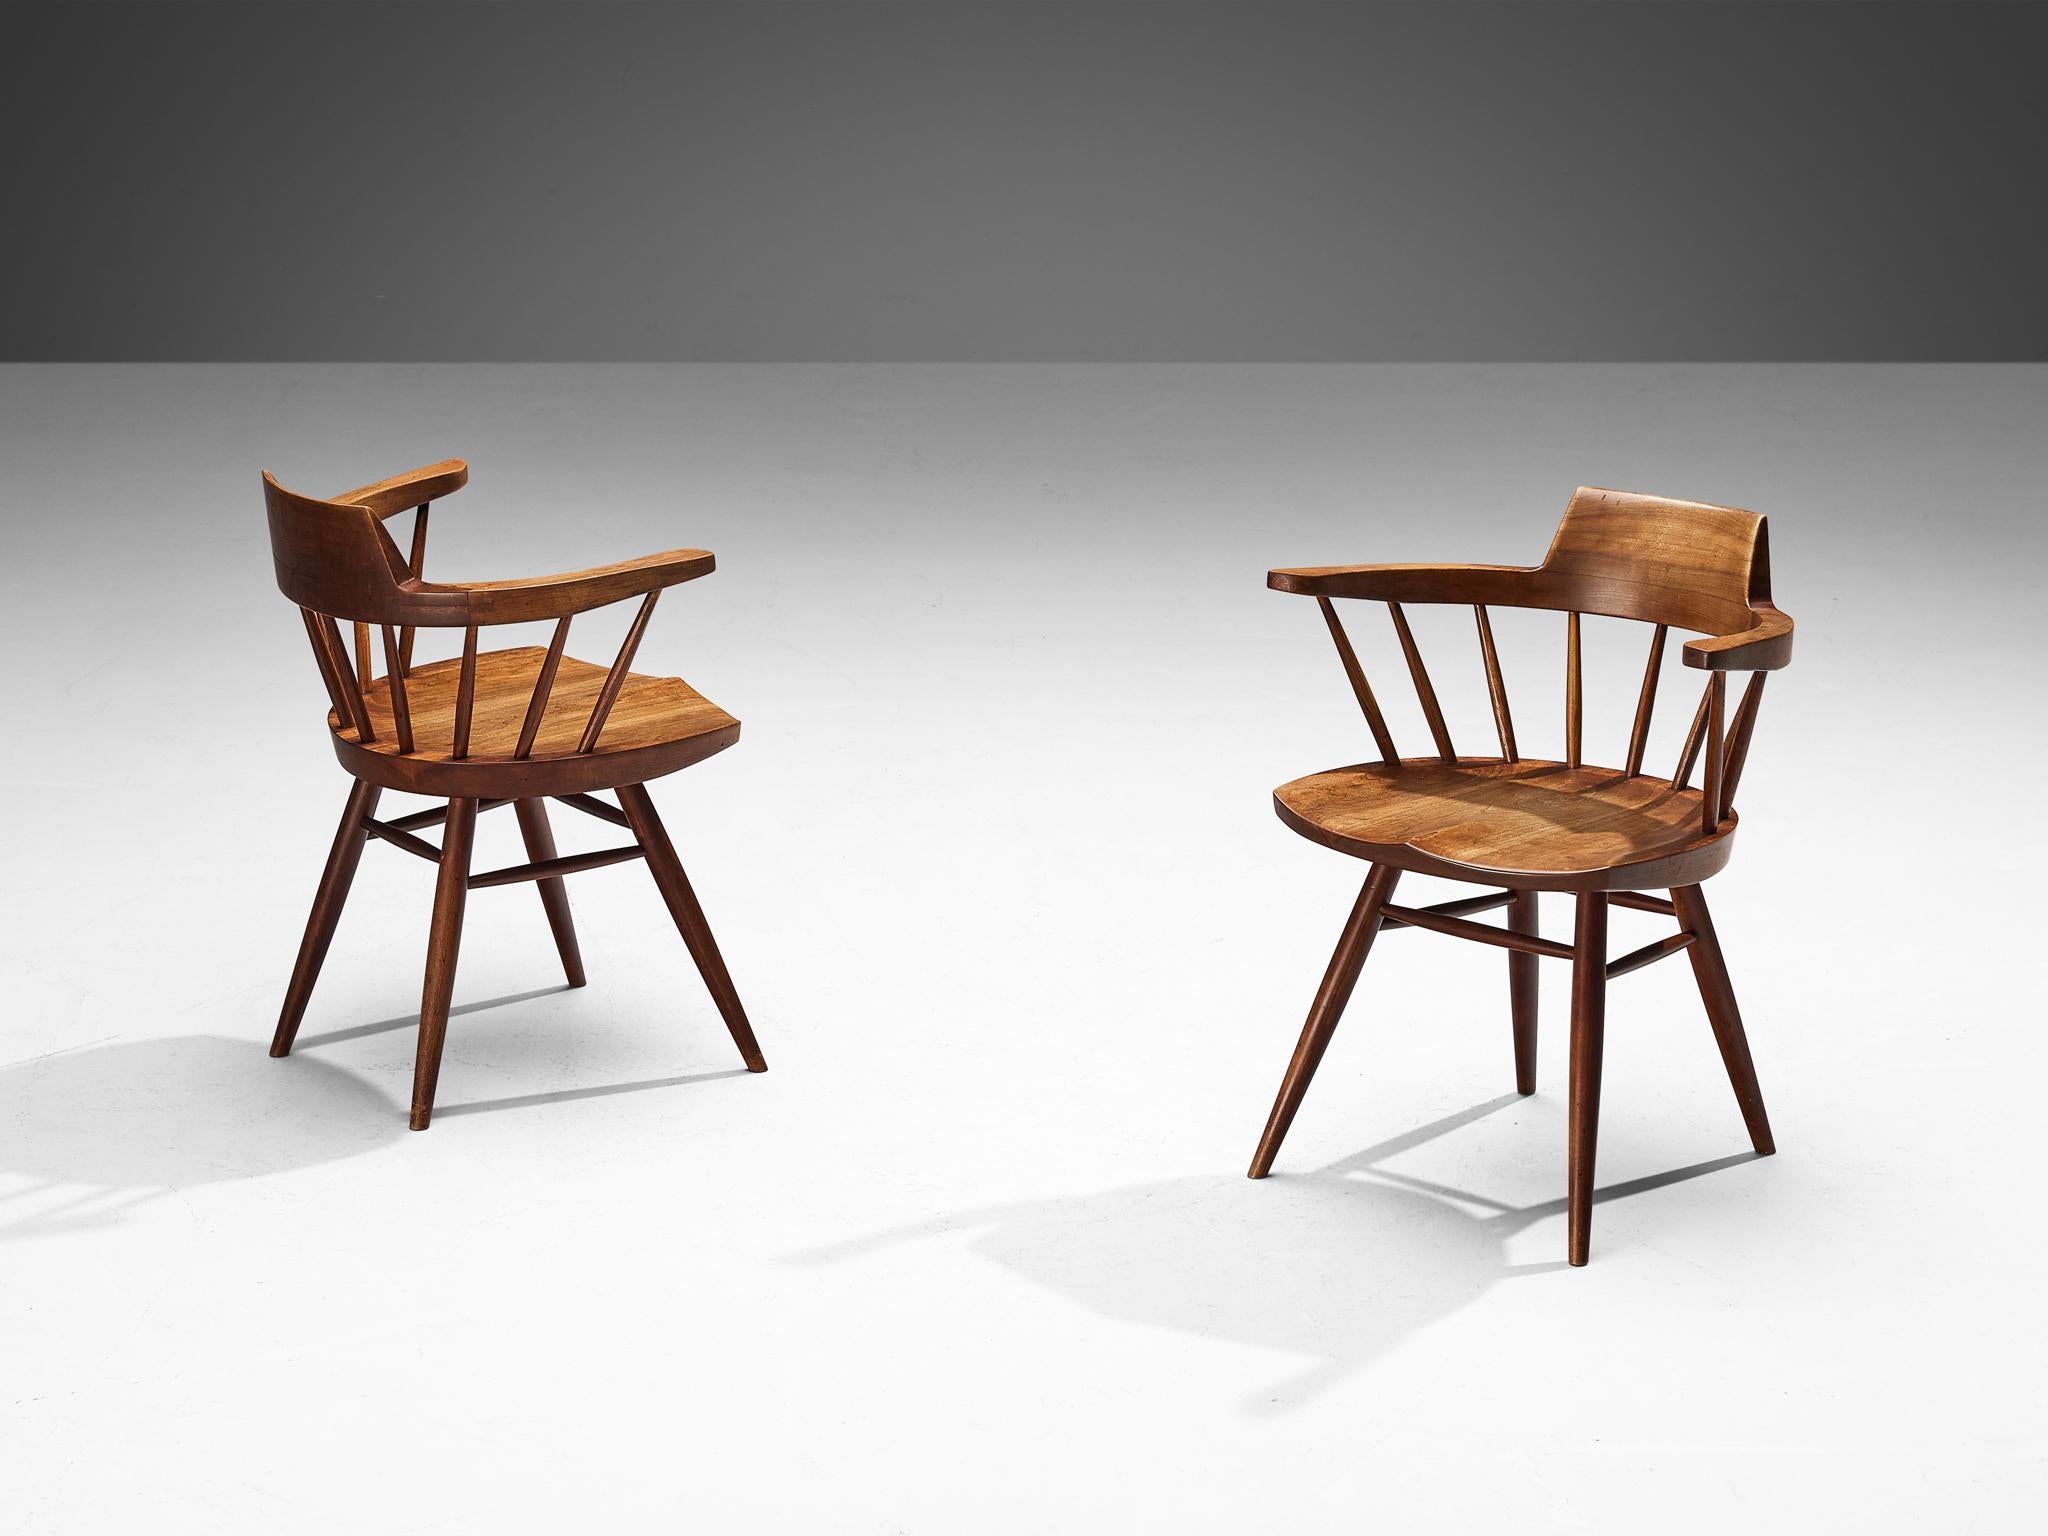 George Nakashima, captain’s chairs or armchairs, cherry, United States, 1982

With regard to its essential form, material use, and woodwork, this pair of captain’s chairs is a testimony to George Nakashima's expert craftsmanship and distinctive